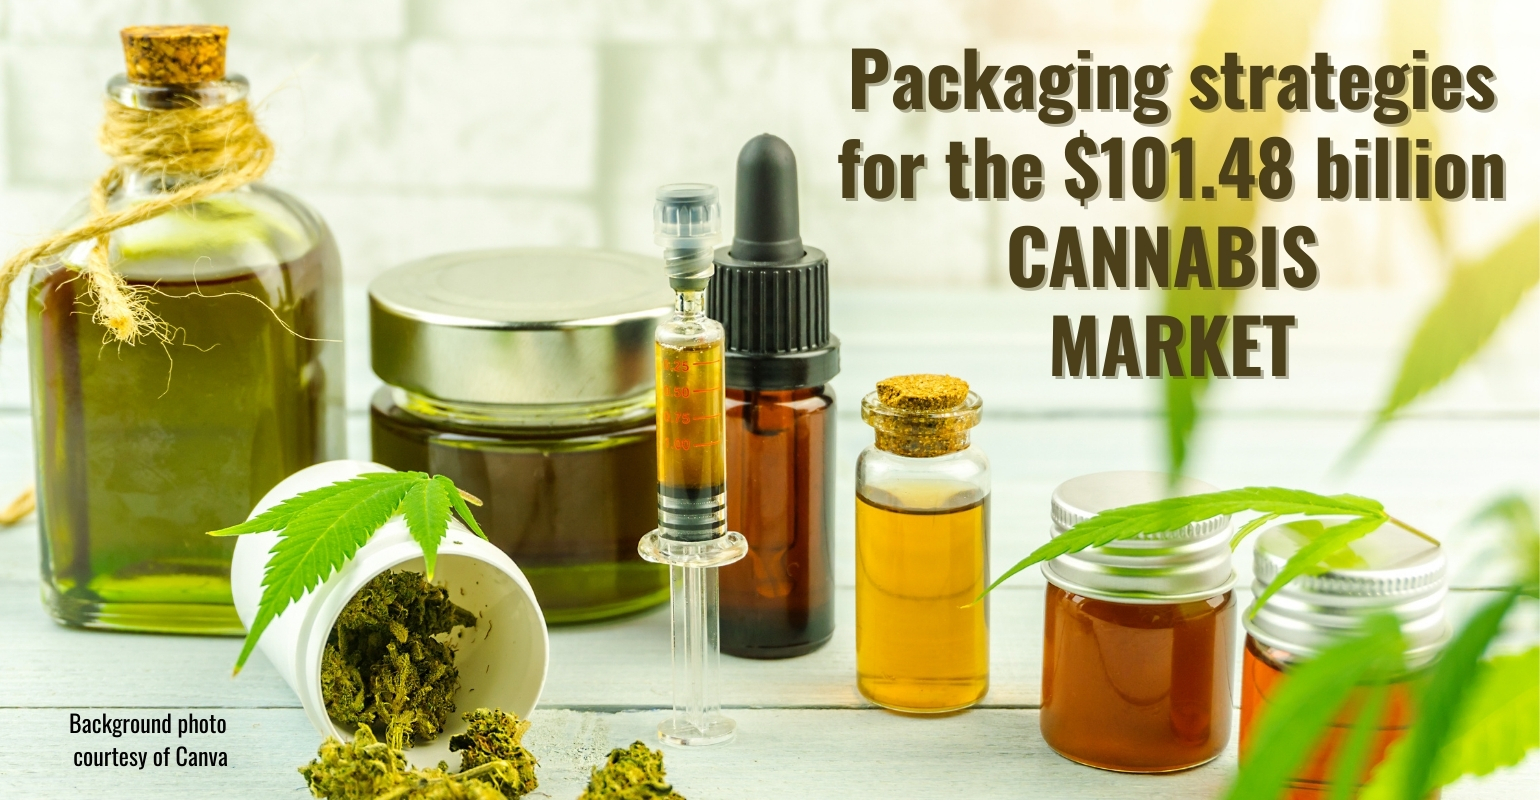 What are the Best Packaging Strategies for Cannabis Products?